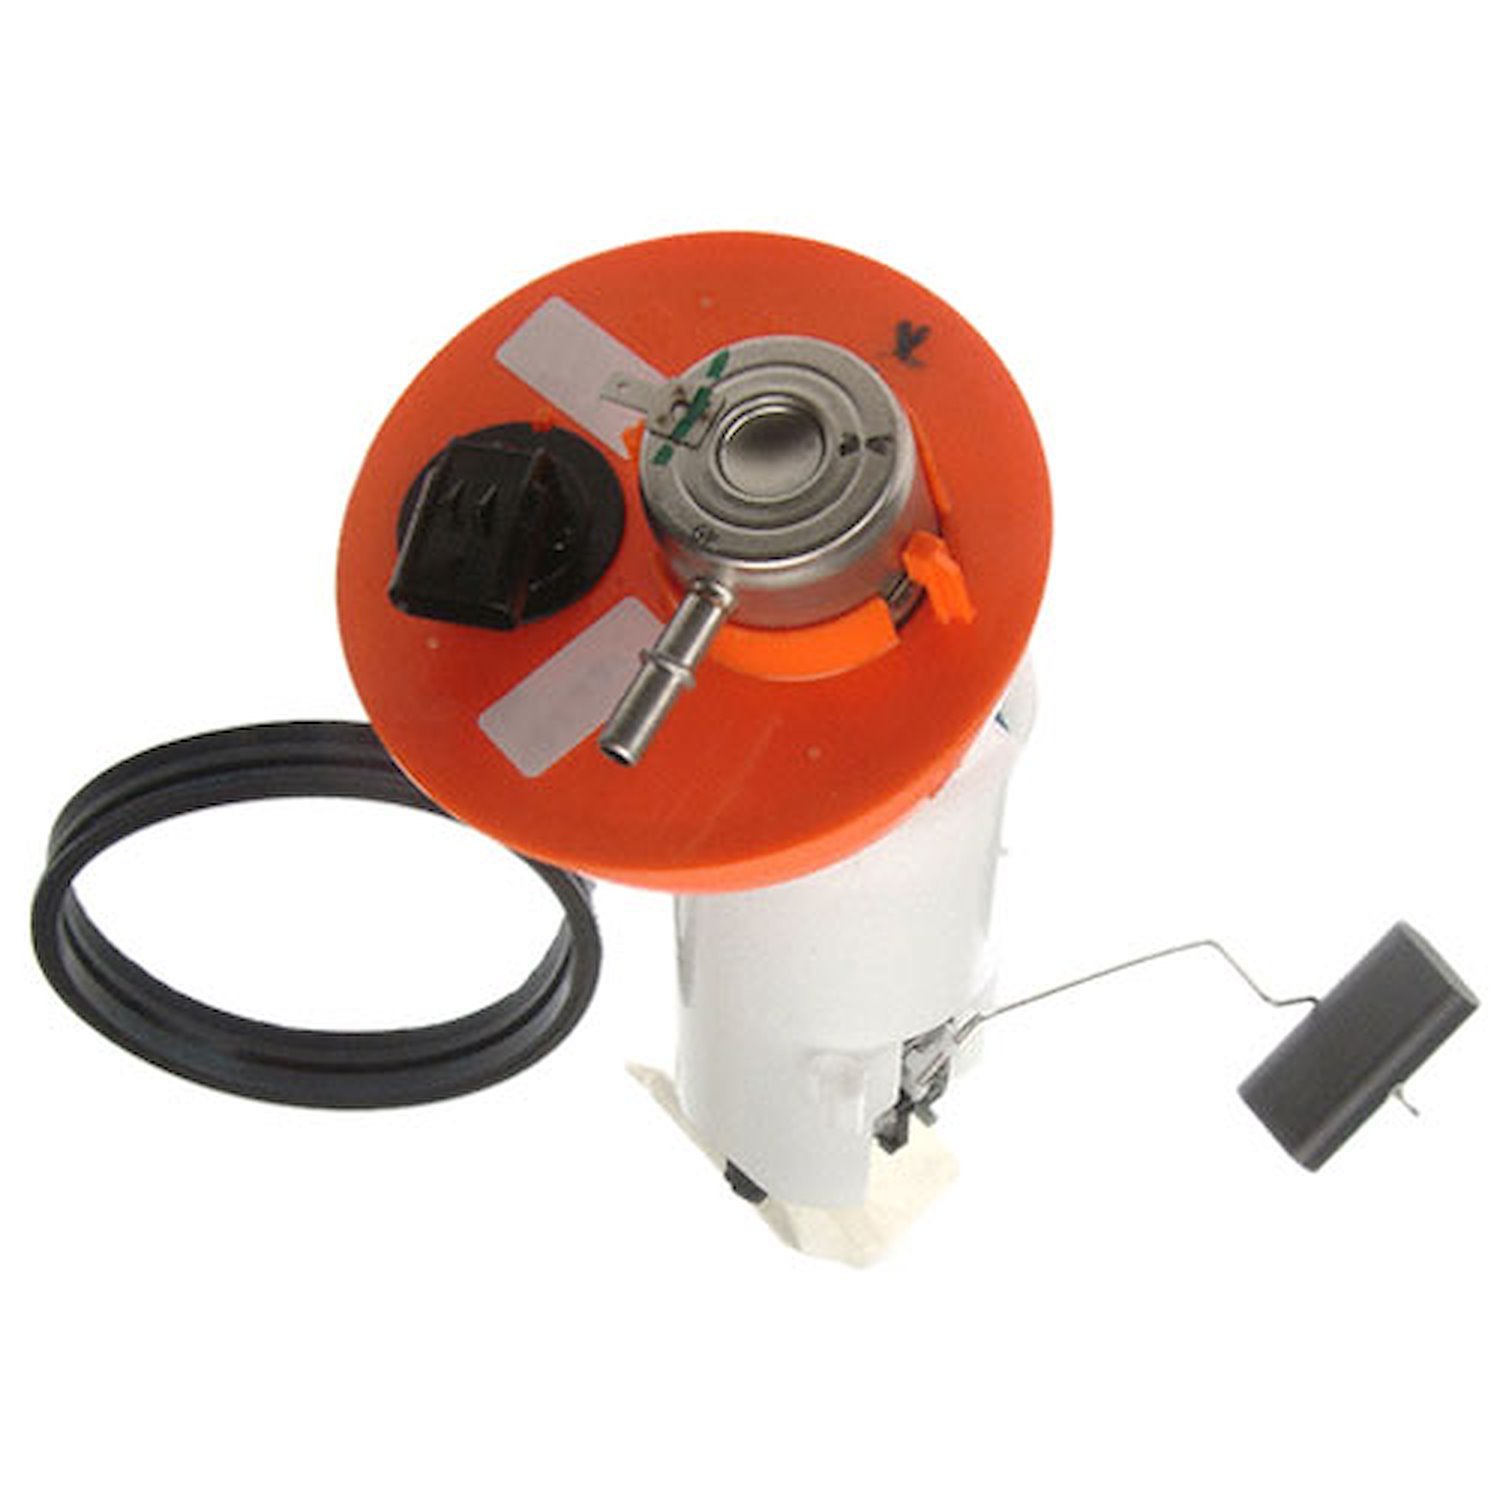 OE Chrysler/Dodge Replacement Electric Fuel Pump Module Assembly